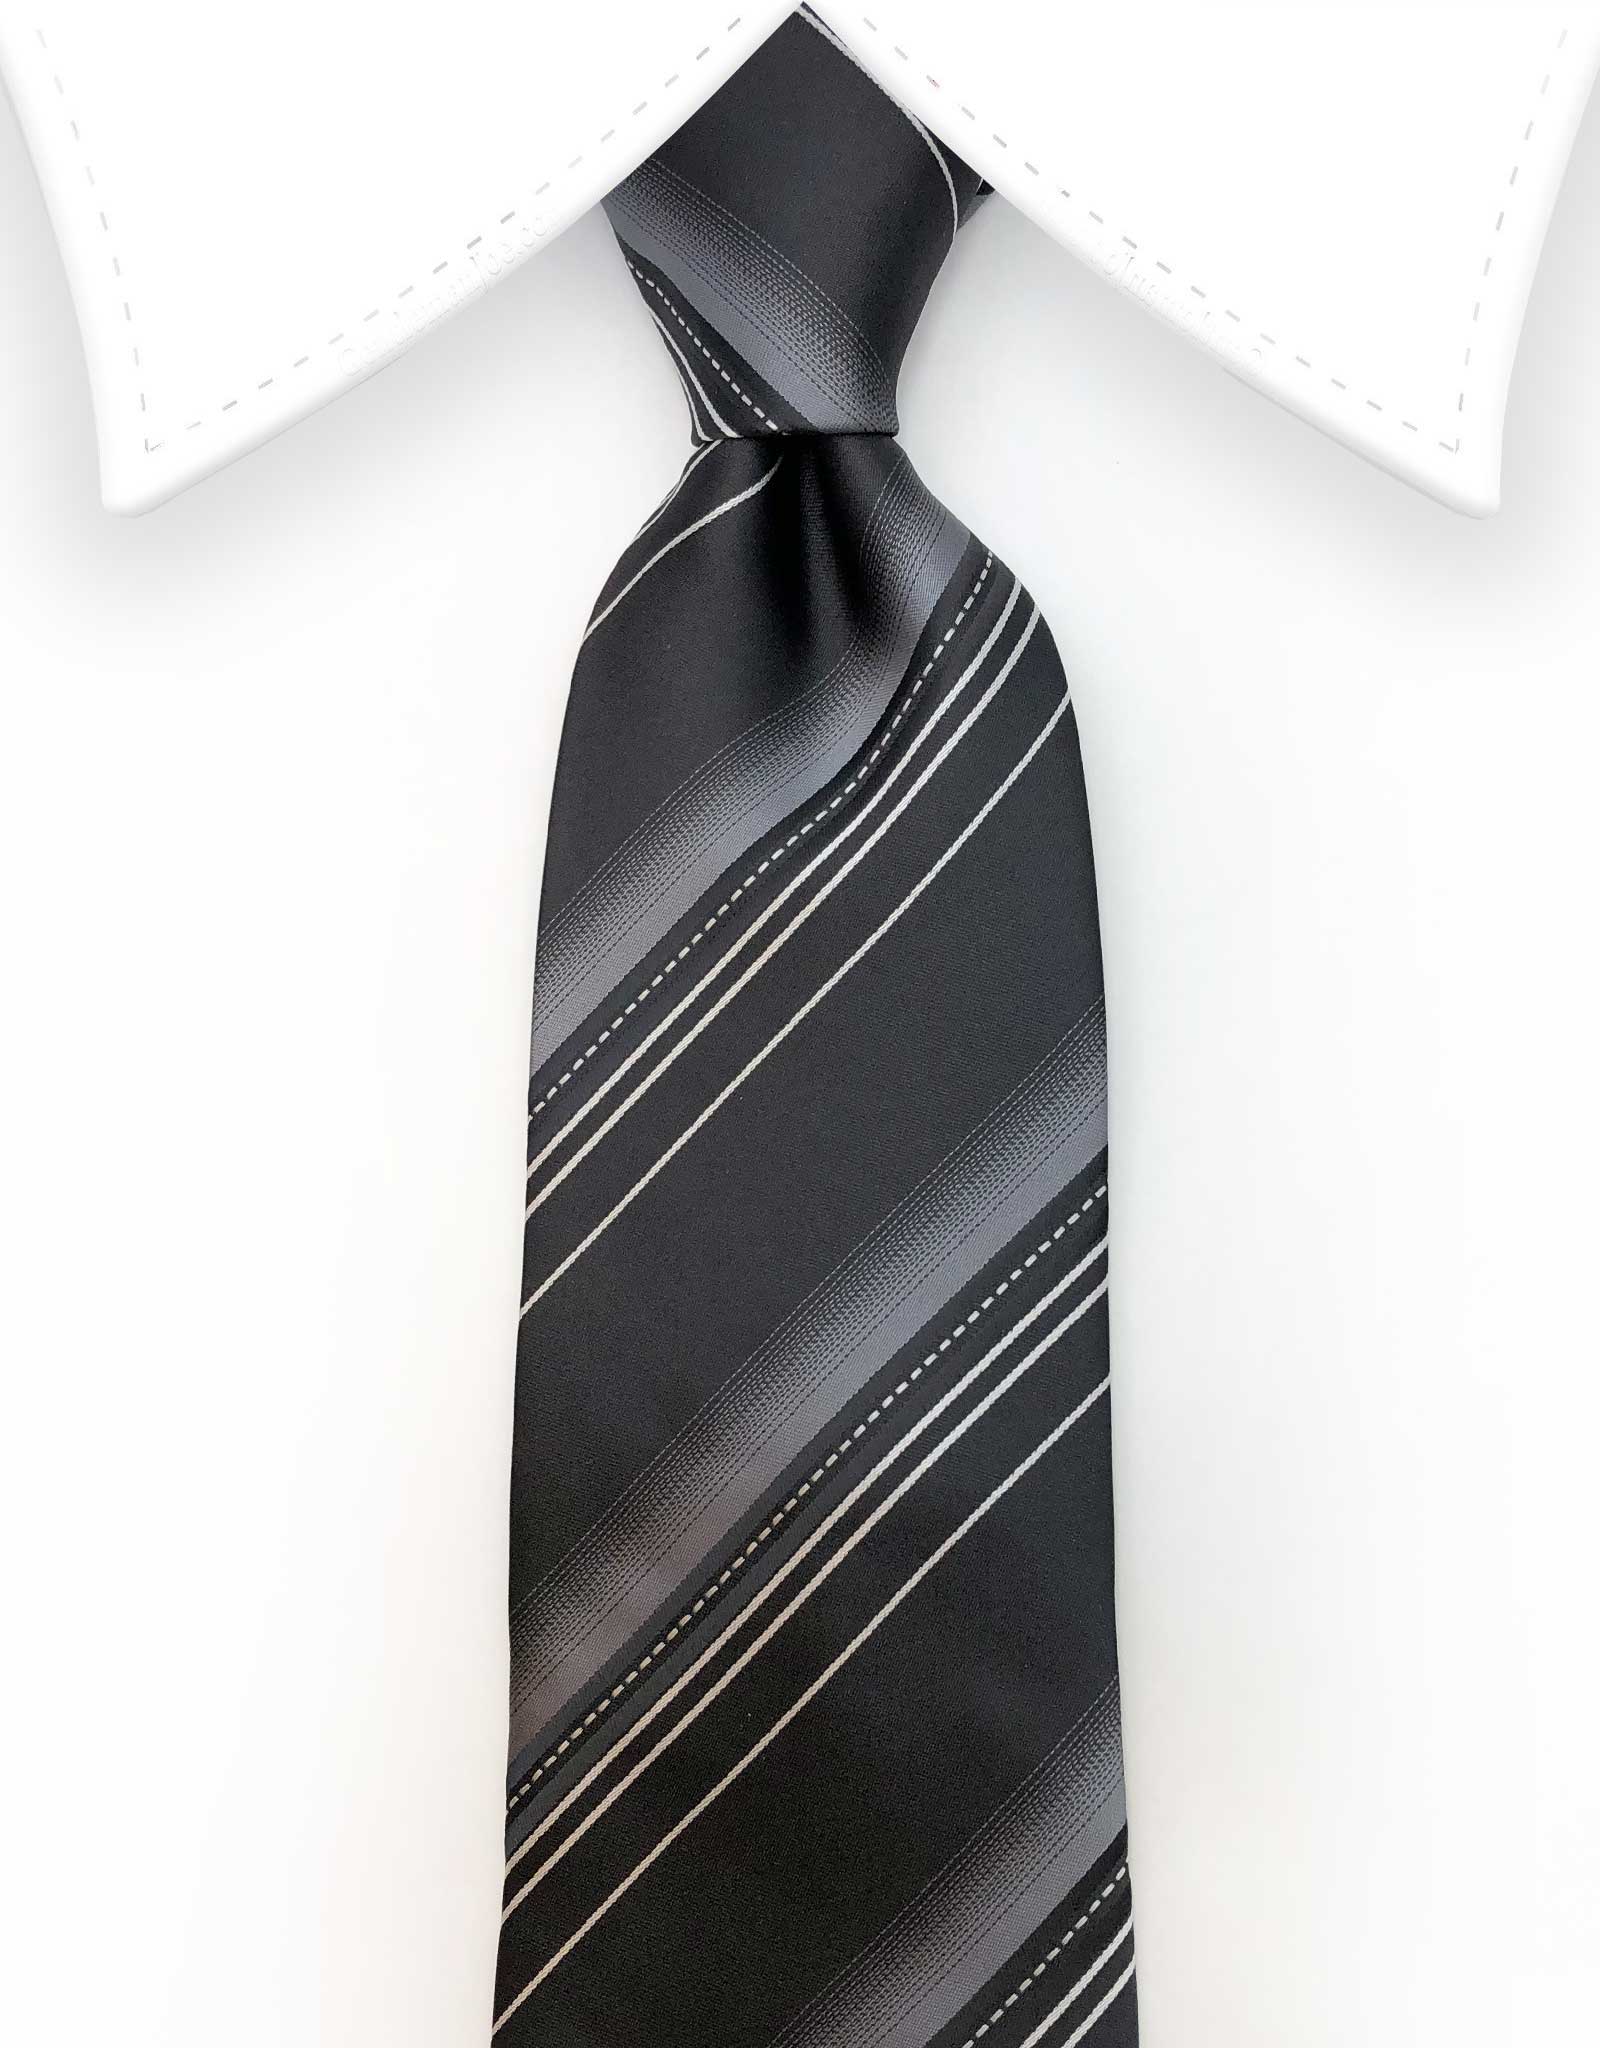 Black Charcoal and White Striped Tie